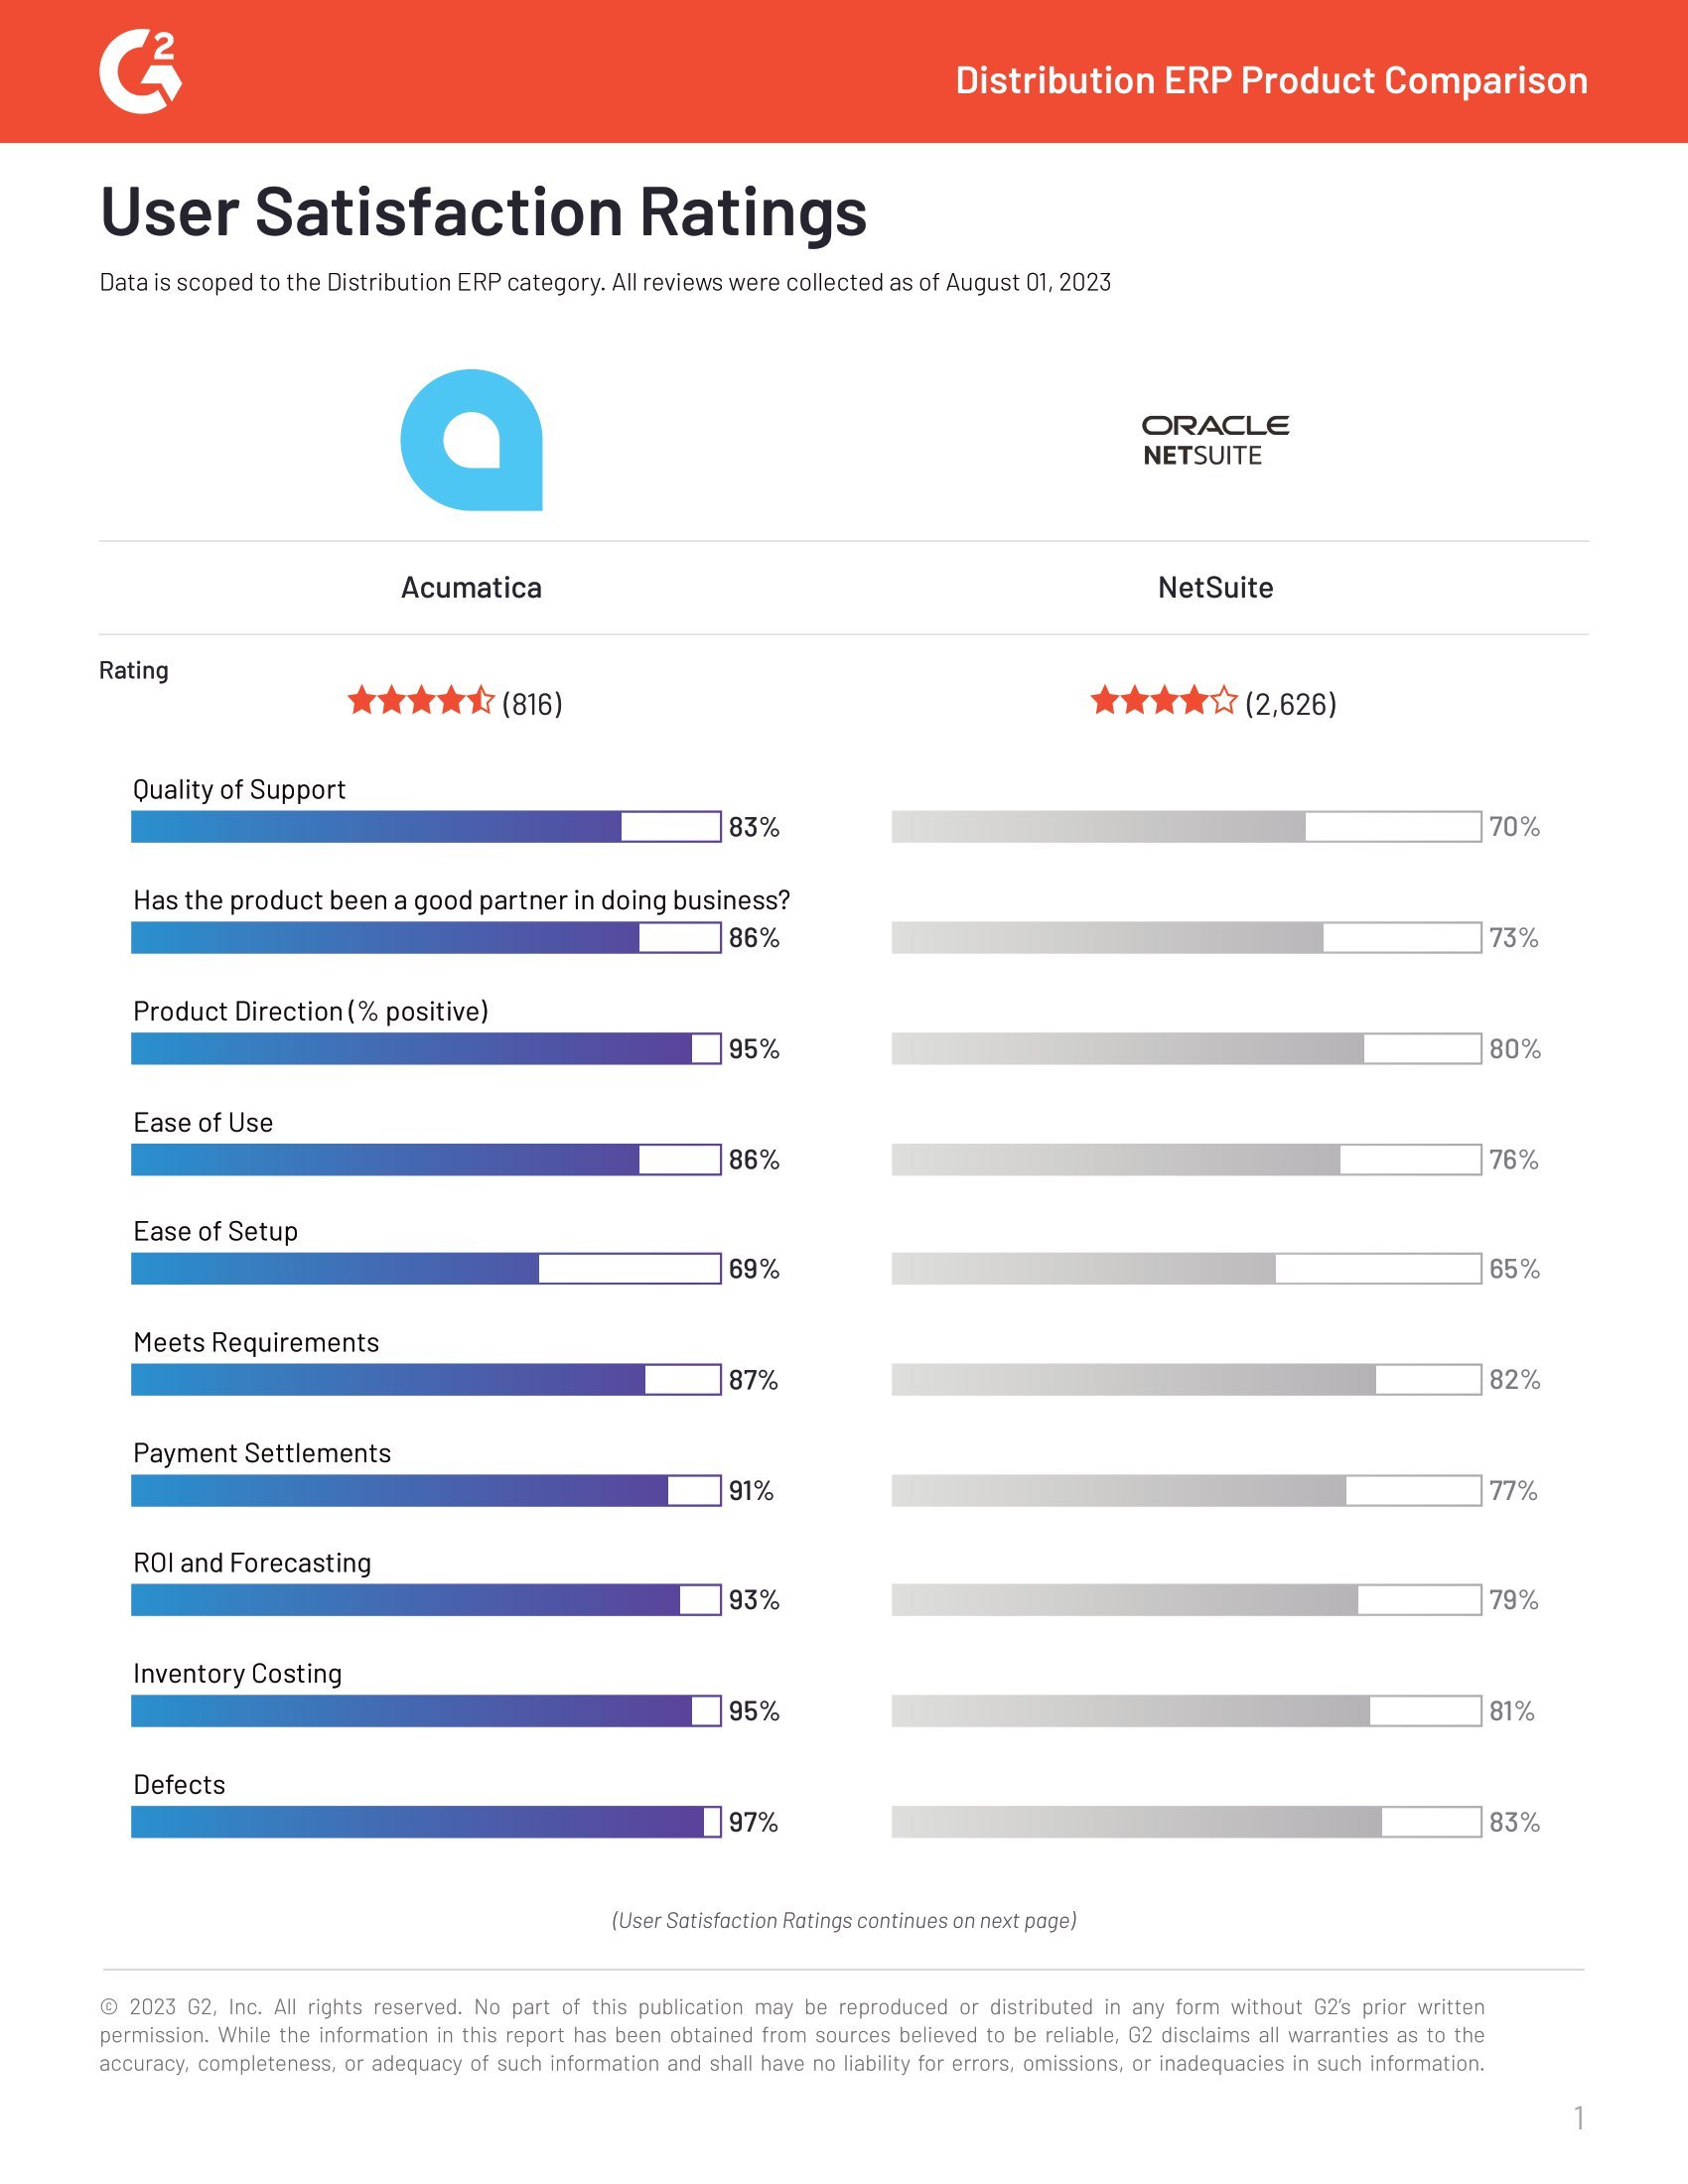 New G2 User Satisfaction Ratings Report: A Must Read for Distribution Businesses Comparing Acumatica and Oracle NetSuite